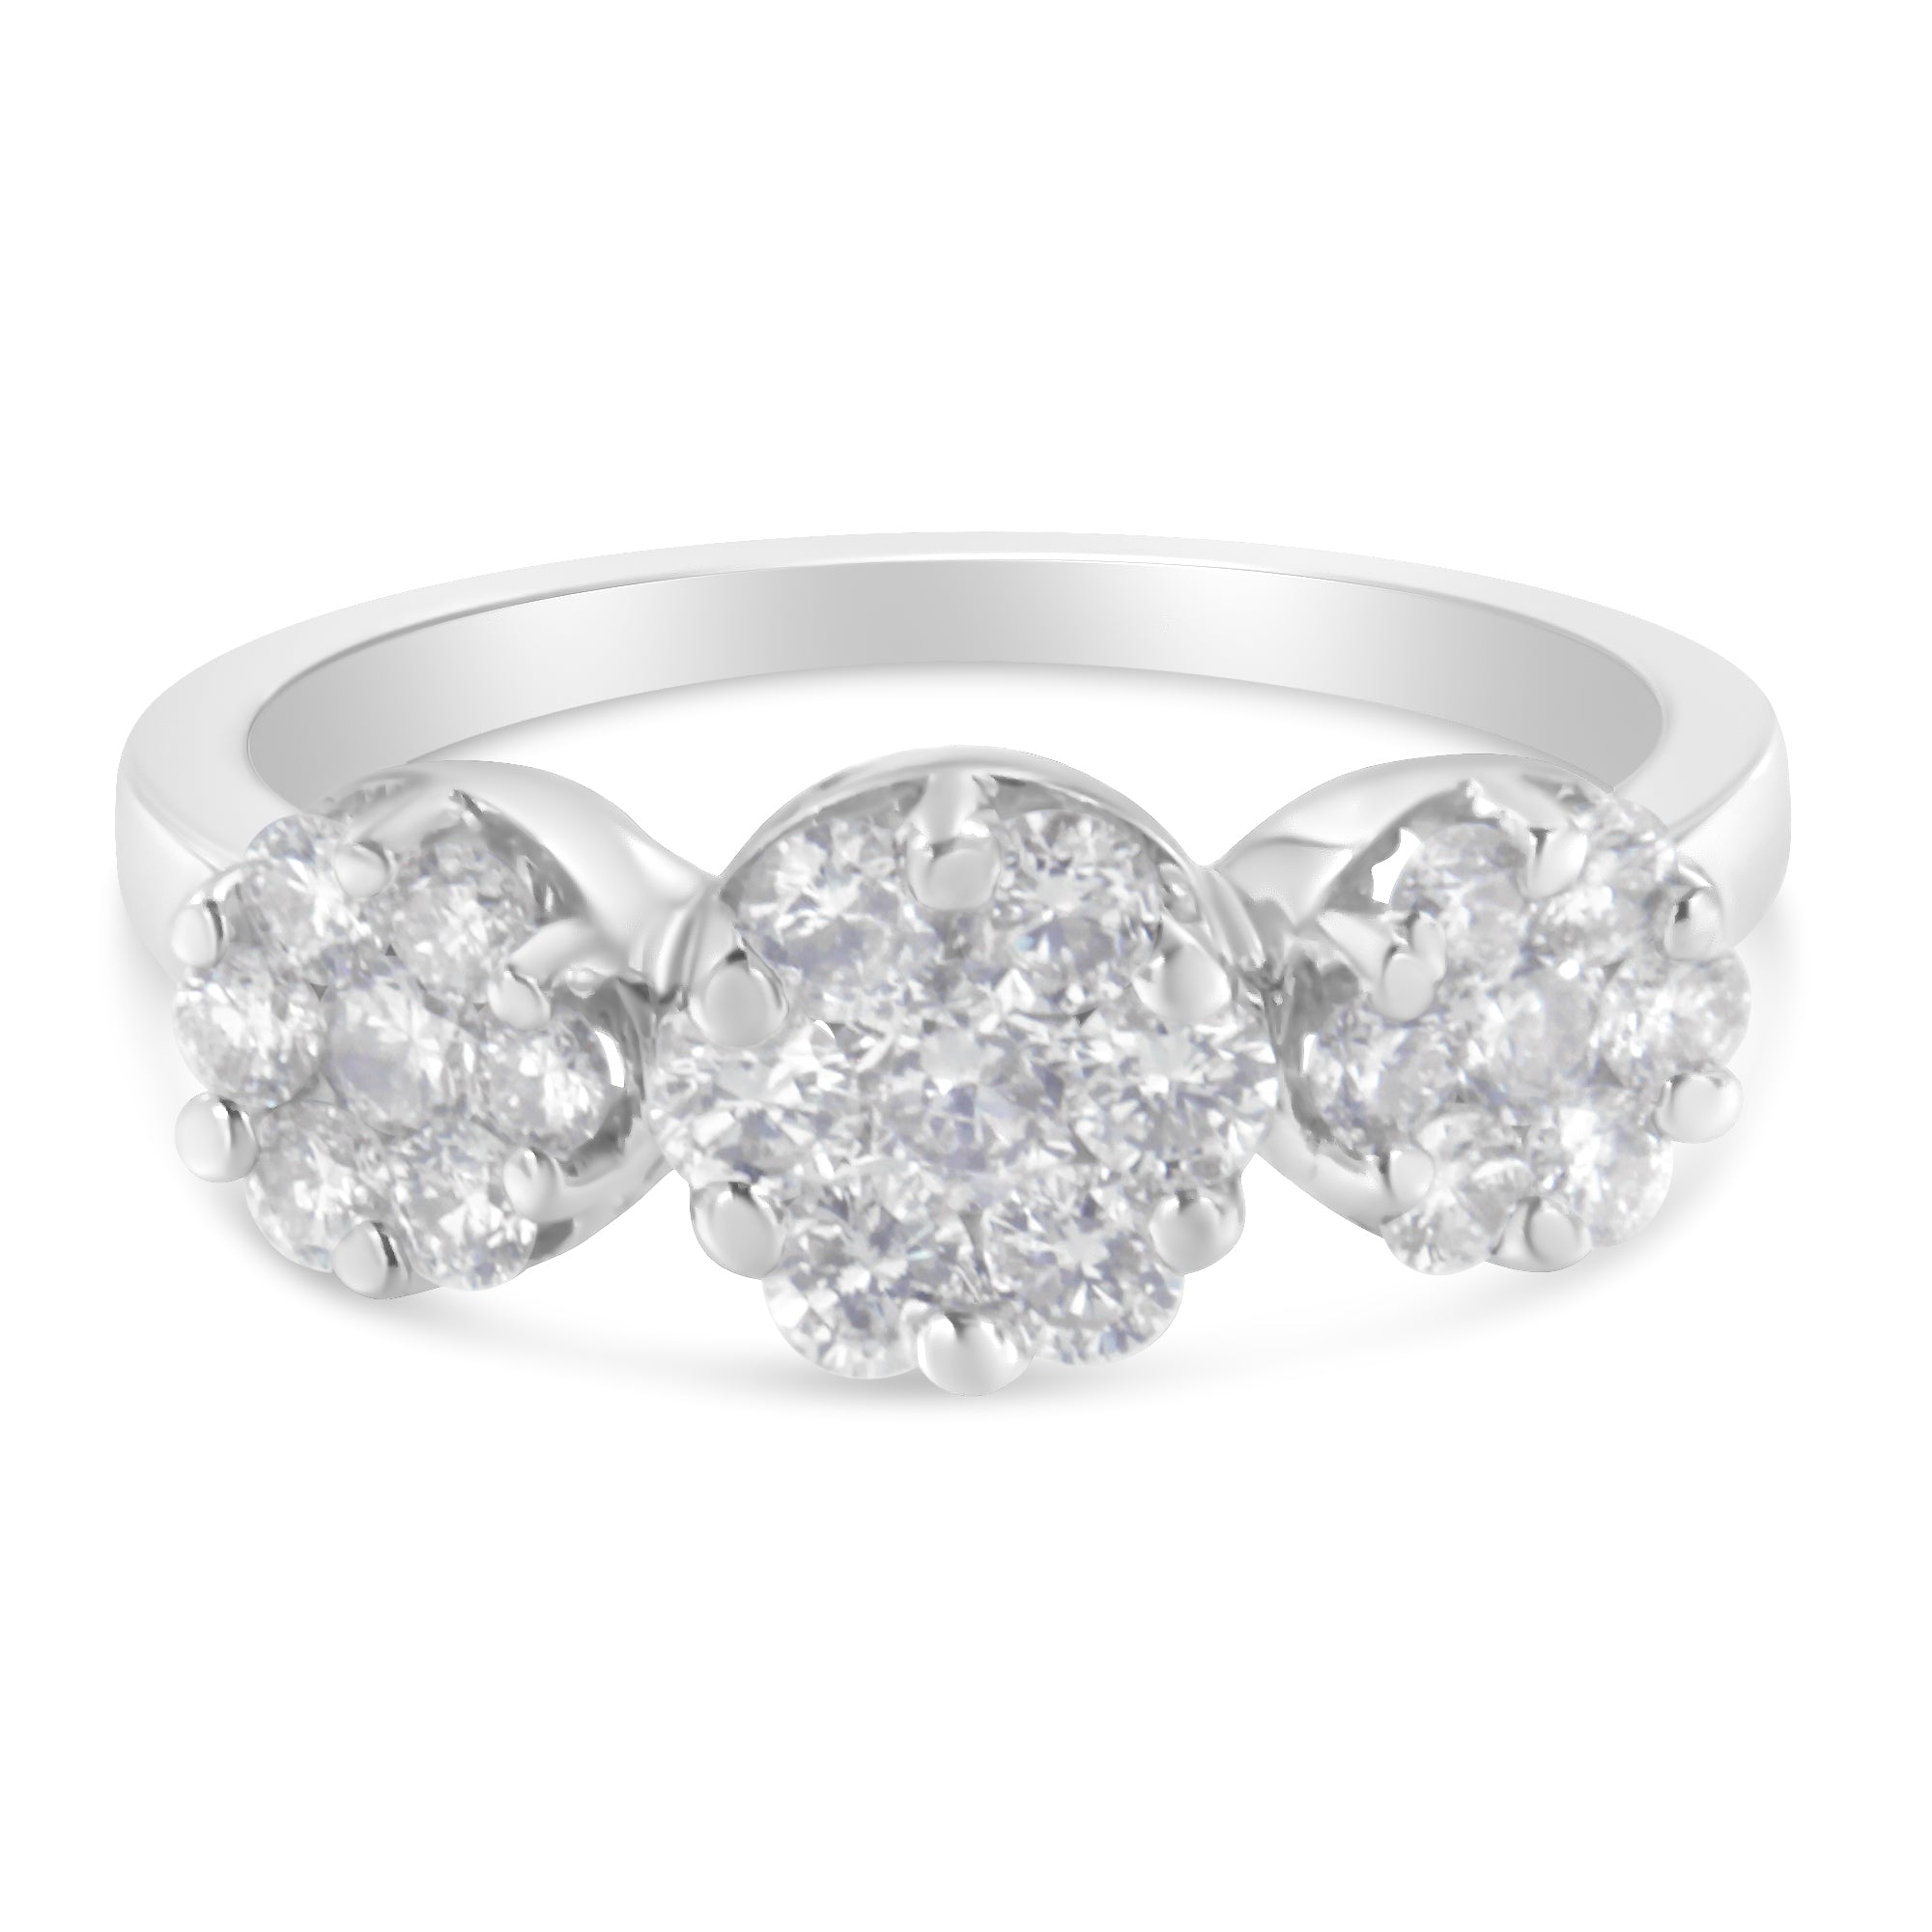 14K-White-Gold-1-1/4-Cttw-Brilliant-Cut-Diamond-Three-Round-Floral-Clusters-Engagement-Or-Fashion-Ring-(H-I-Color,-Si2-I1-Clarity)-Size-7-Rings